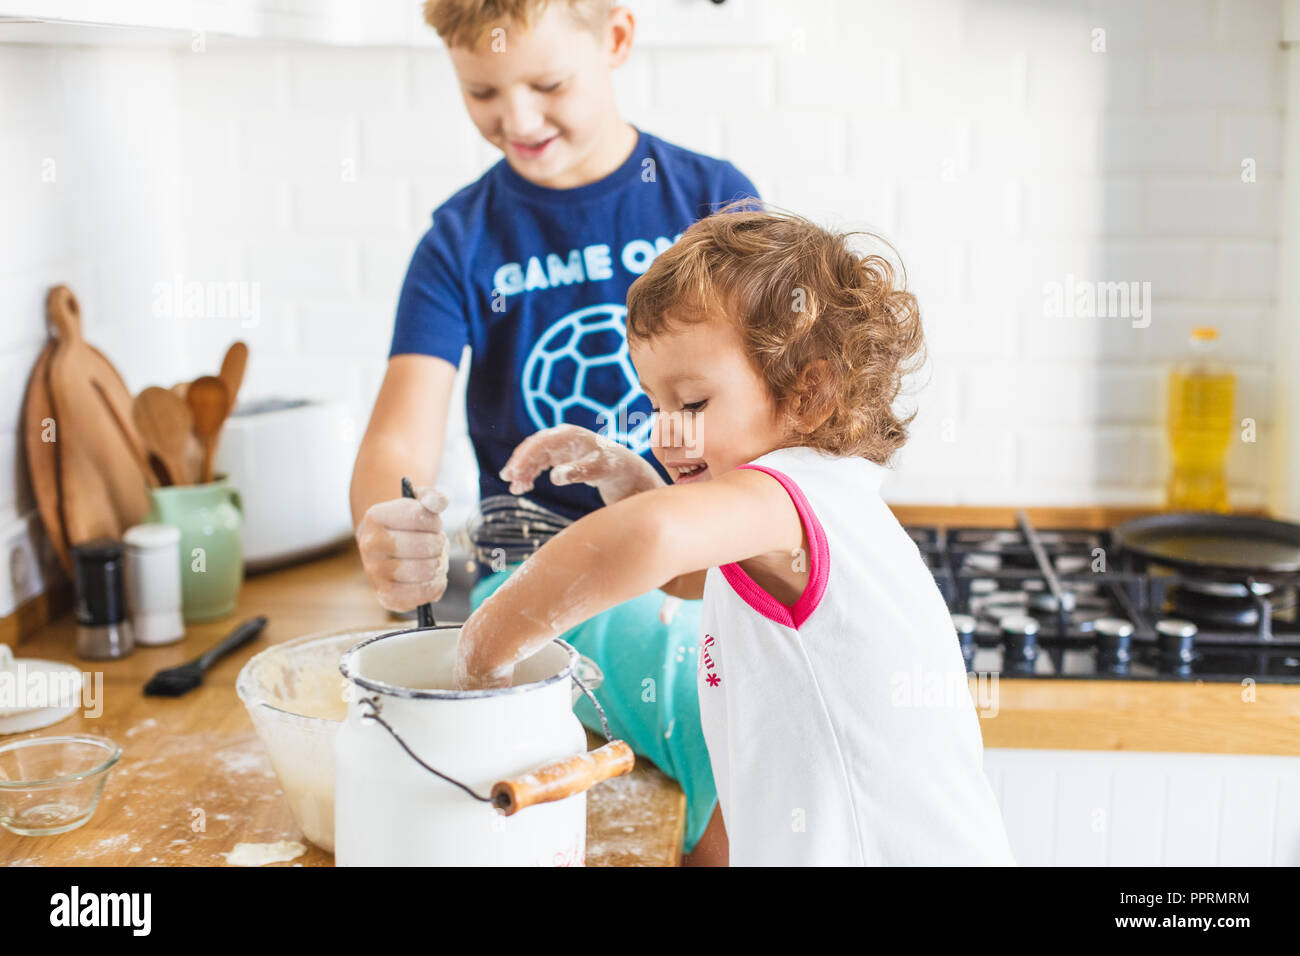 Brother and sister preparing dough for pancakes at the kitchen. Concept of food preparation, white kitchen on background. Casual lifestyle photo serie Stock Photo